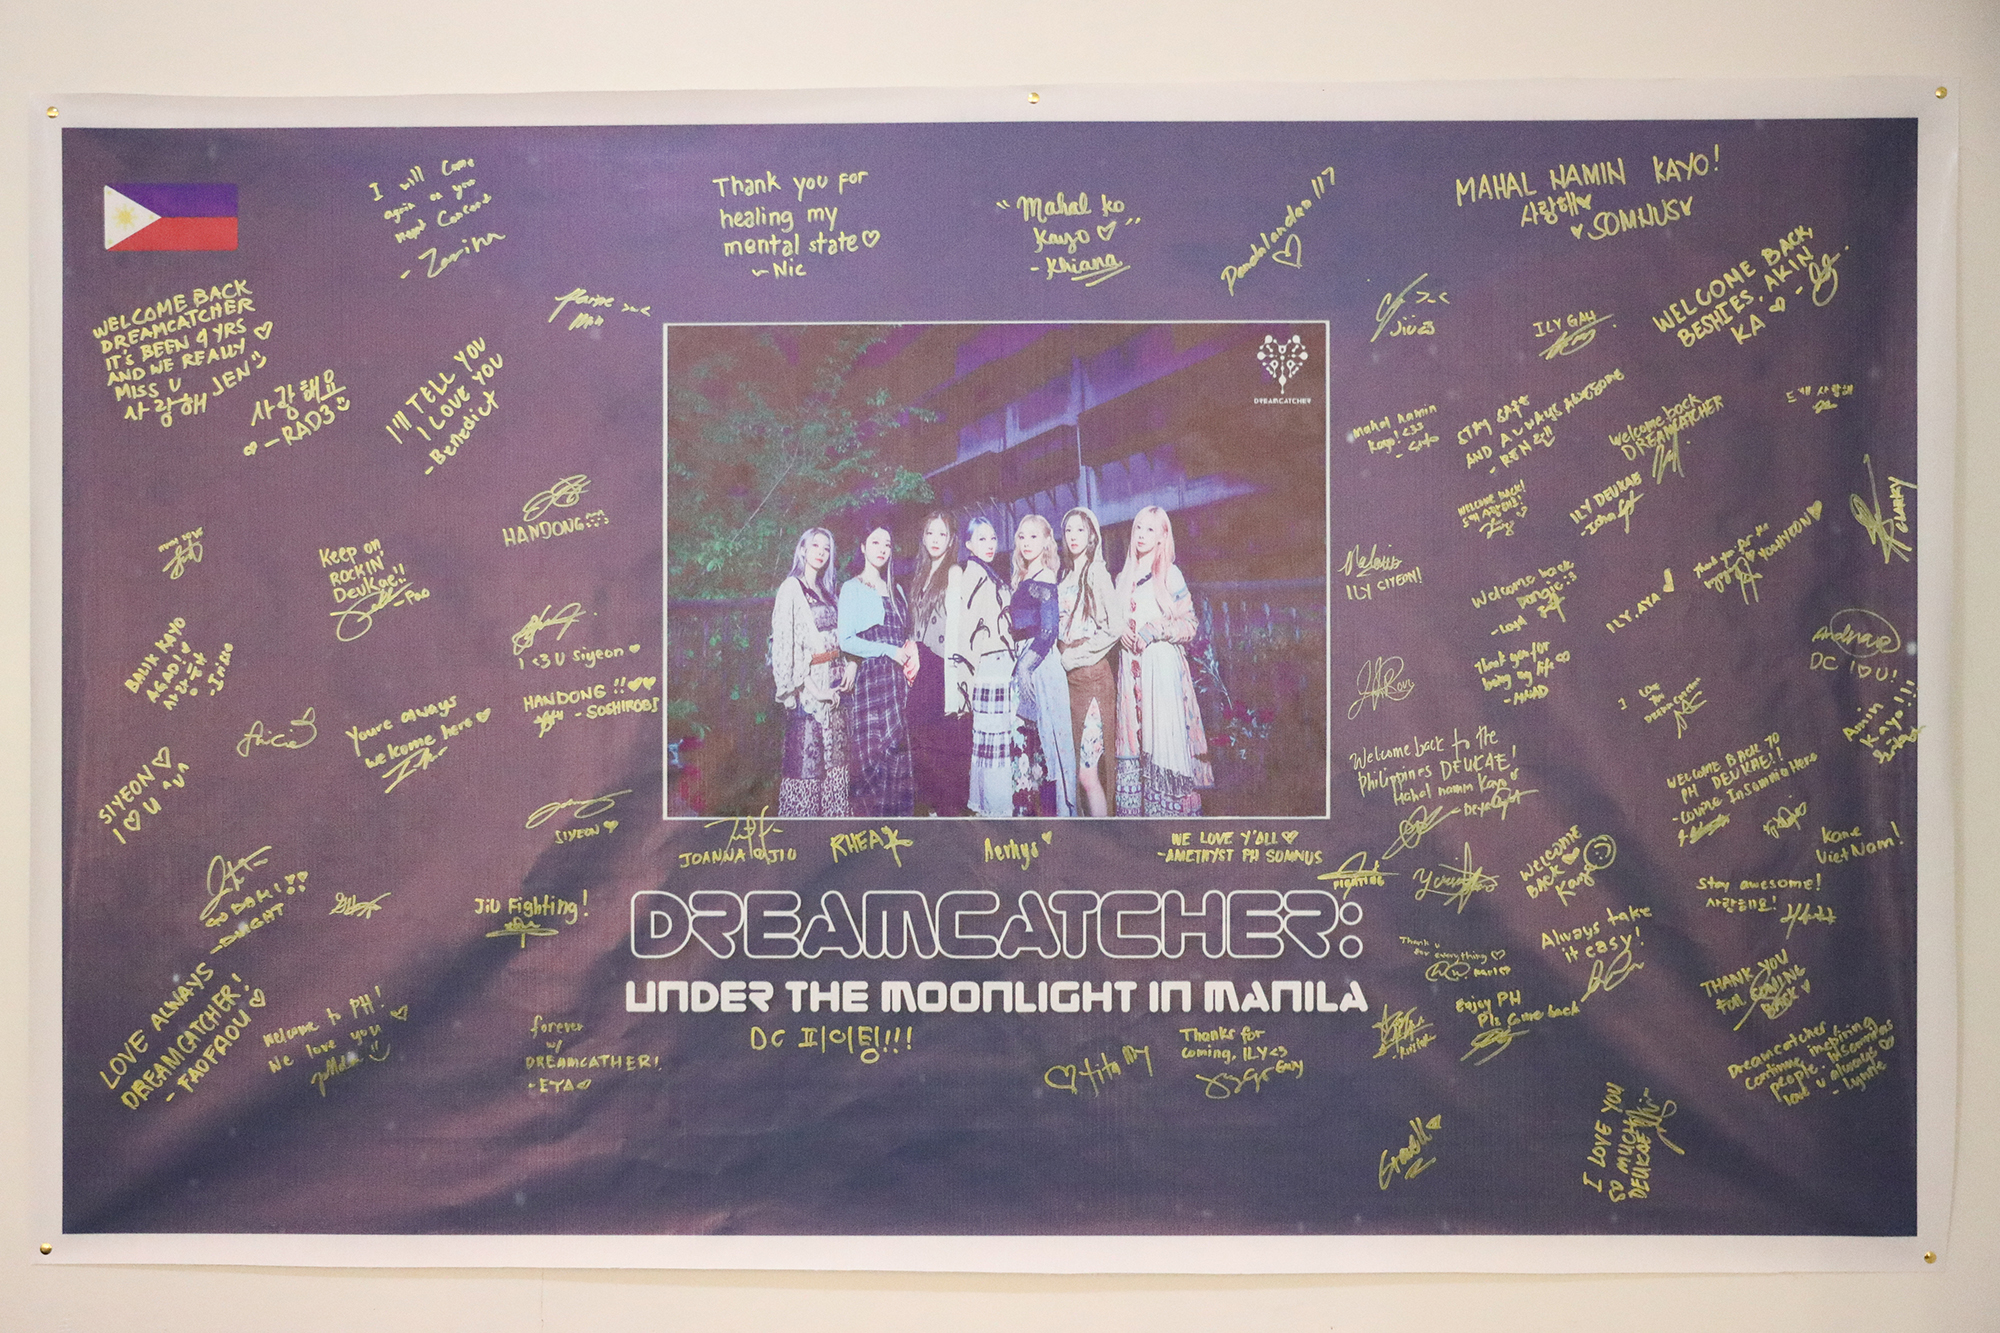 Black banner with Dreamcatcher under the moonlight picture on it signed by fans.